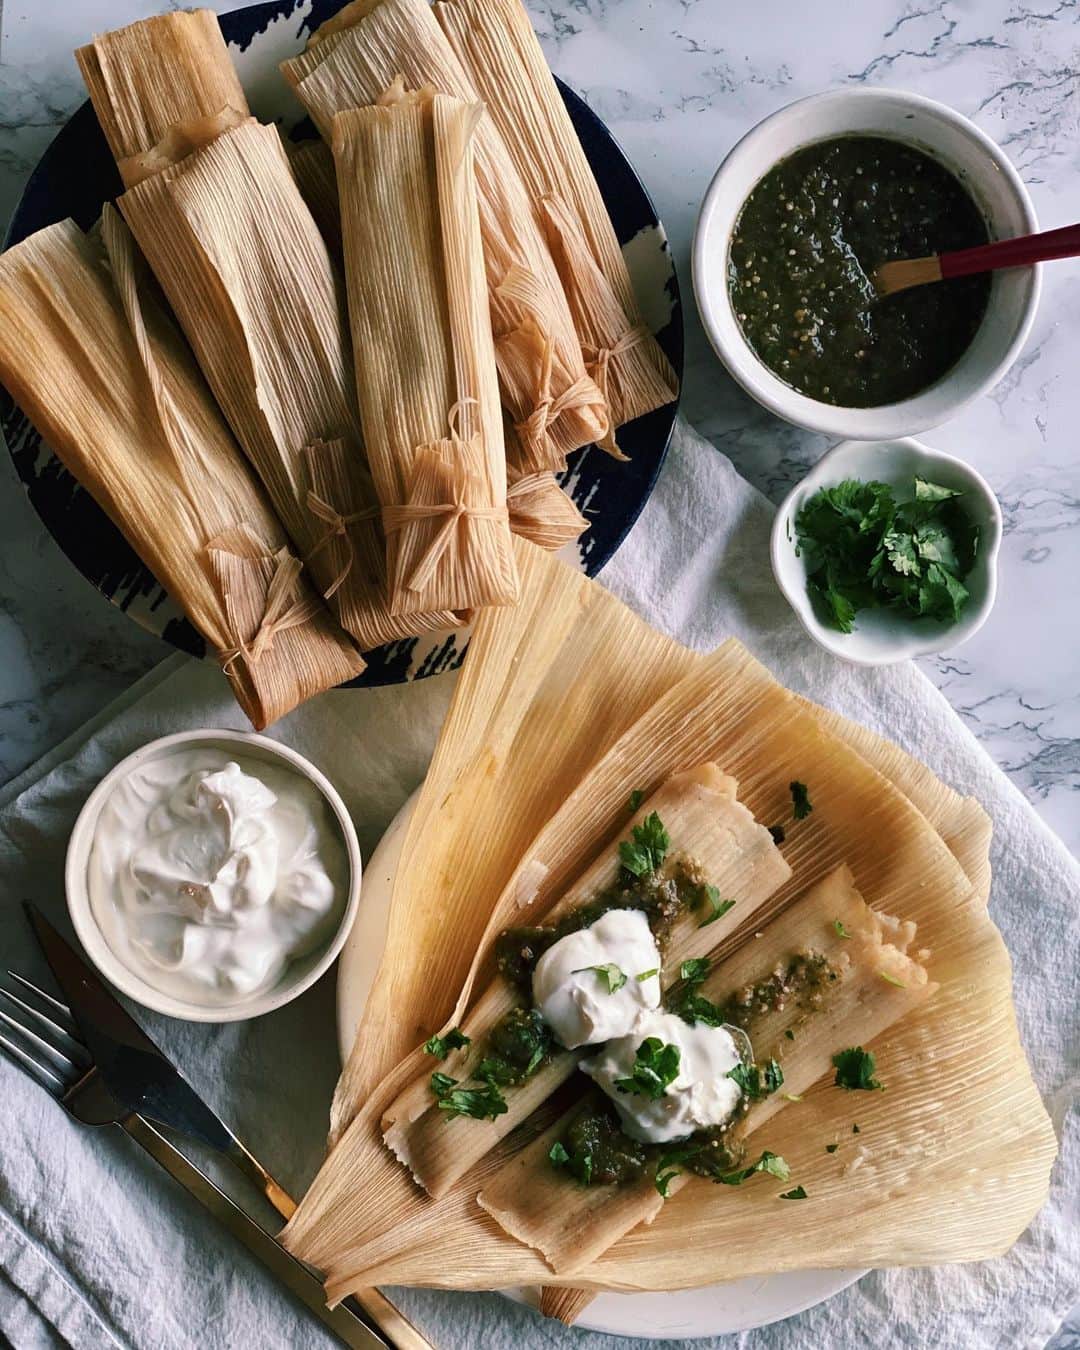 Antonietteのインスタグラム：「Tamales are usually prepared on big occasions or holidays, but why wait? With the way how things are going these days ya gotta live today like there’s no tamale. 😆 or more like 😒? These tamales de rajas con queso (cheese and roasted poblano peppers) are perfect for #meatlessmonday or any day really! 😋 This version is not too hard but takes some time for prep and cooking.  . . TAMALES DE RAJAS CON QUESO  DOUGH 3 1/4 cups instant corn masa 2 1/2 teaspoons salt 1 1/2 teaspoons baking powder 1 cup vegetable oil  2 1/4 cups veggie or chix broth  FILLING 12 ounces cheese cut into thick strips. I used Monterey Jack and queso fresco 5 large poblano peppers roasted and cut into strips  1/2 packet corn husks (about 24)  PREPARATION  Place the husks in a large bowl and fill with hot water, let it soften for an hour.   MAKE THE DOUGH Combine instant corn masa flour salt, baking powder, oil and broth until dough is wet and is cohesive. Let it sit for half an hour.  FILL AND WRAP THE TAMALES  On a corn husk spread a spoonful of the masa onto the bottom half of the husk.  Place roasted chiles and some cheese.   Fold sides in and fold over bottom edge and tie tamale with a piece of corn husk.   Steam tamales upright in a steamer pot, cover and steam for an hour to an hour and a half until dough is fully cooked. Careful as the tamale parcels are hot! 🔥」